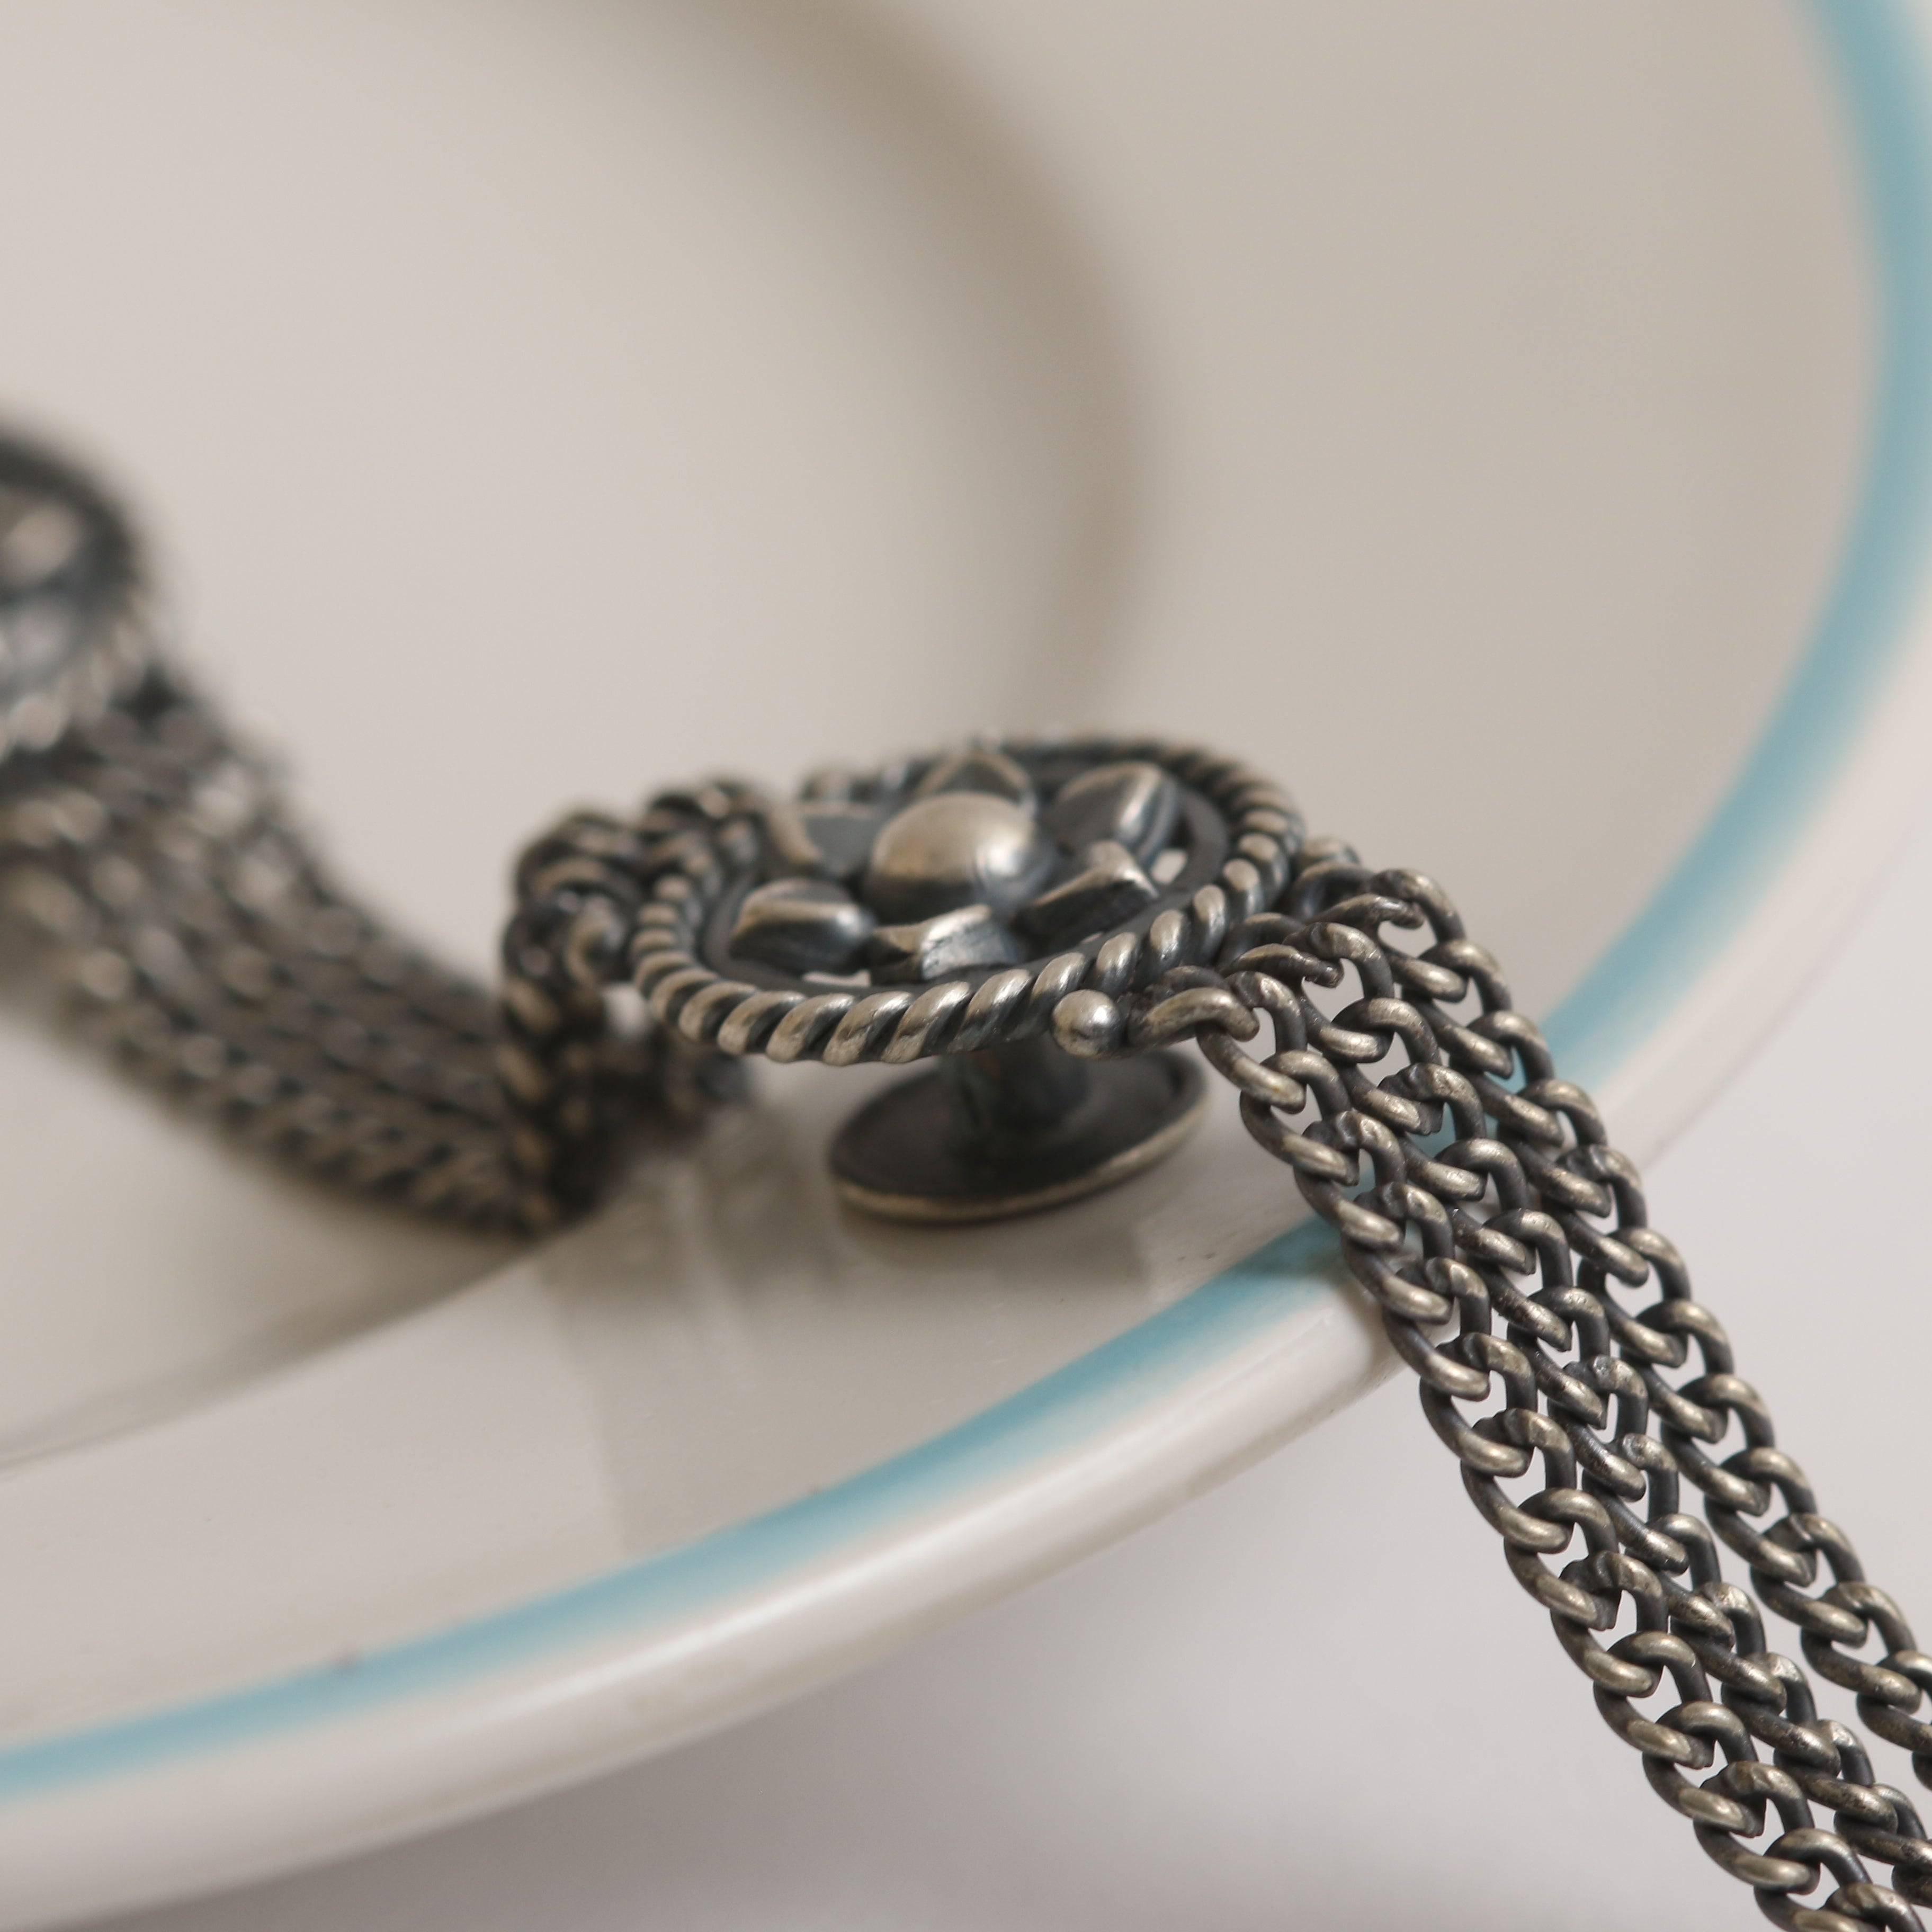 a close up of a chain on a plate